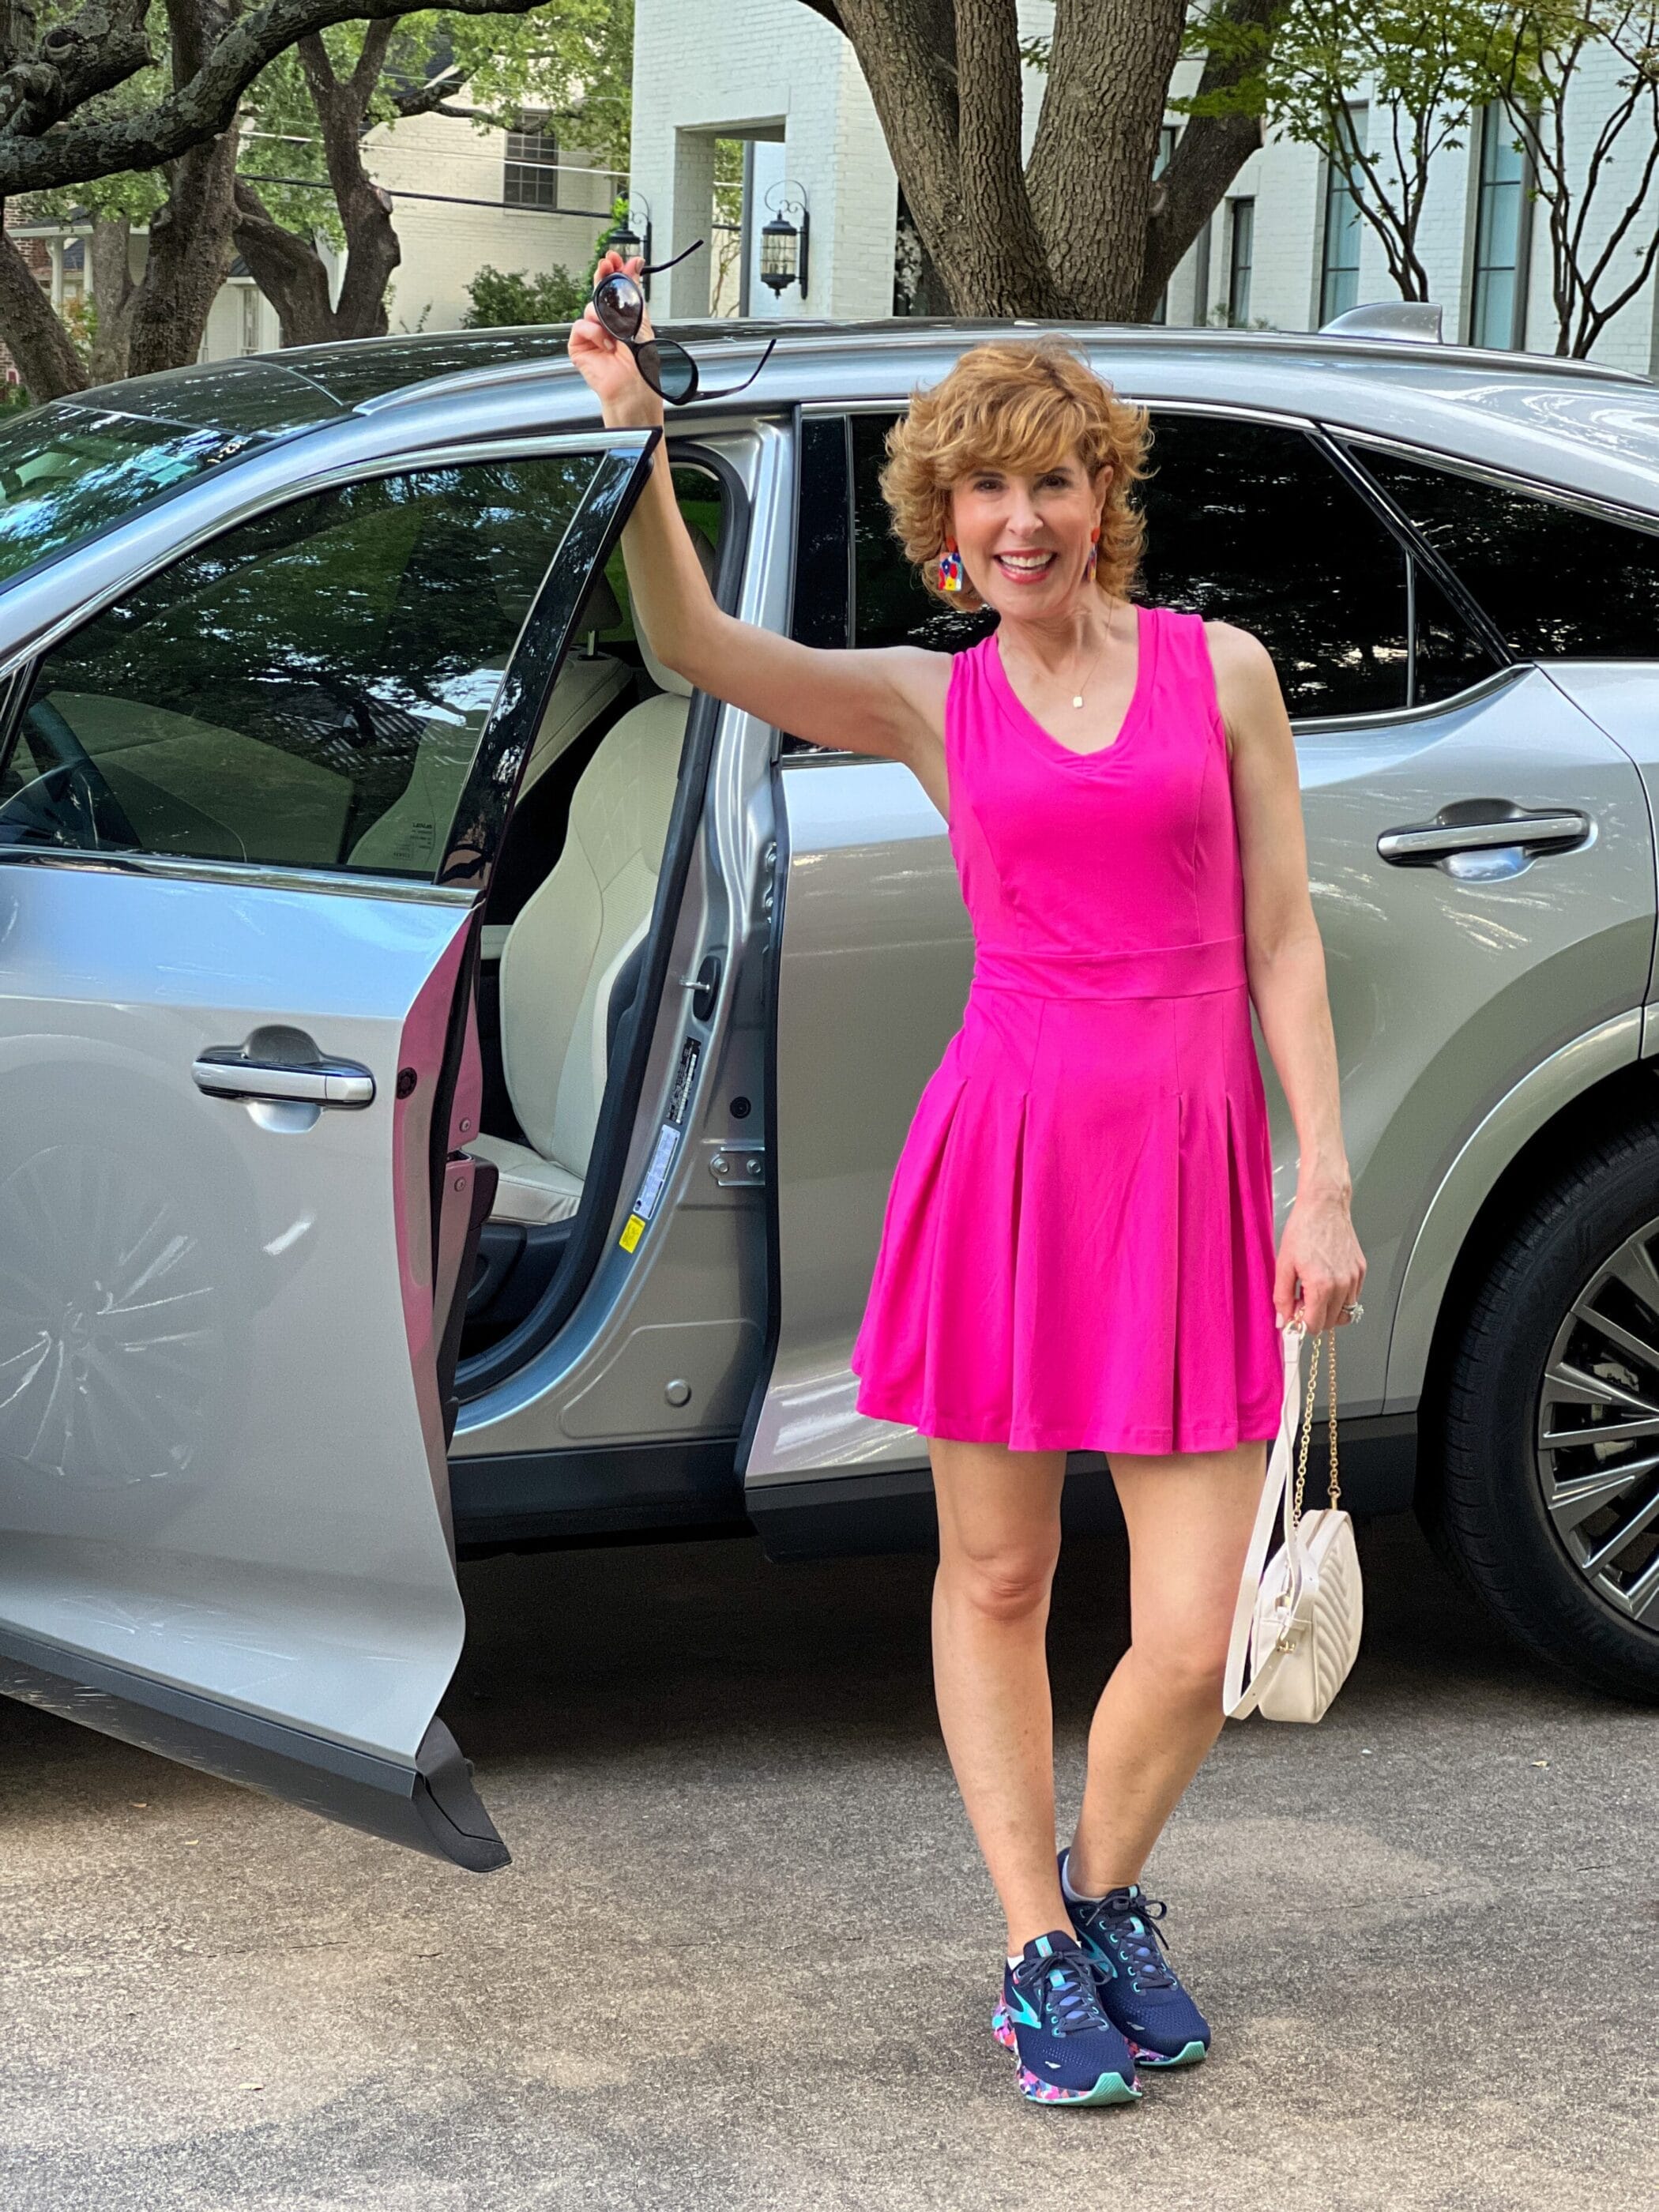 woman over 50 standing by her car wearing Better Than Every Hot Pink Tennis Dress w/ Shorts